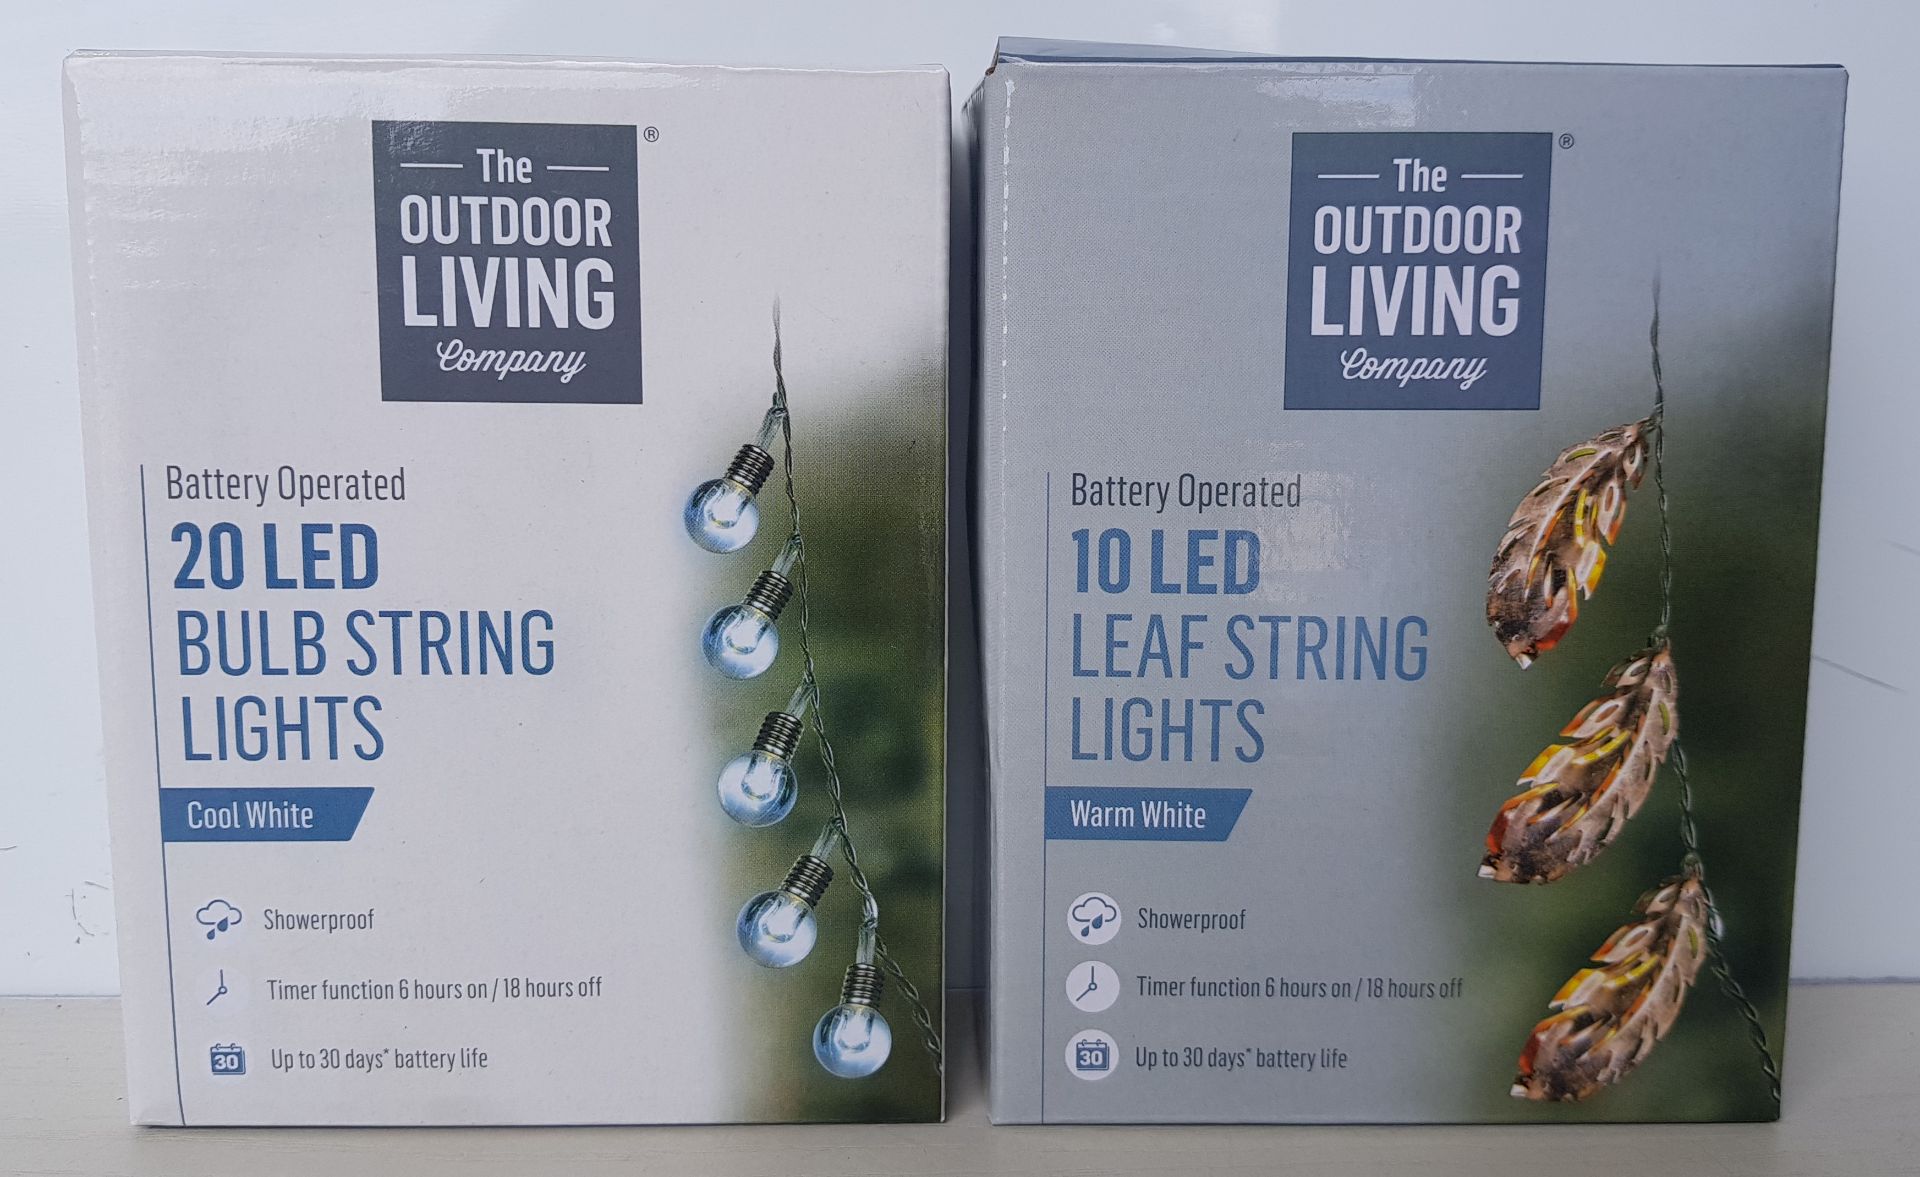 30 X BRAND NEW THE OUTDOOR LIVING MIXED LIGHT LOT CONTAINING 7X 20 LED BULB STRING LIGHTS - 23X 10